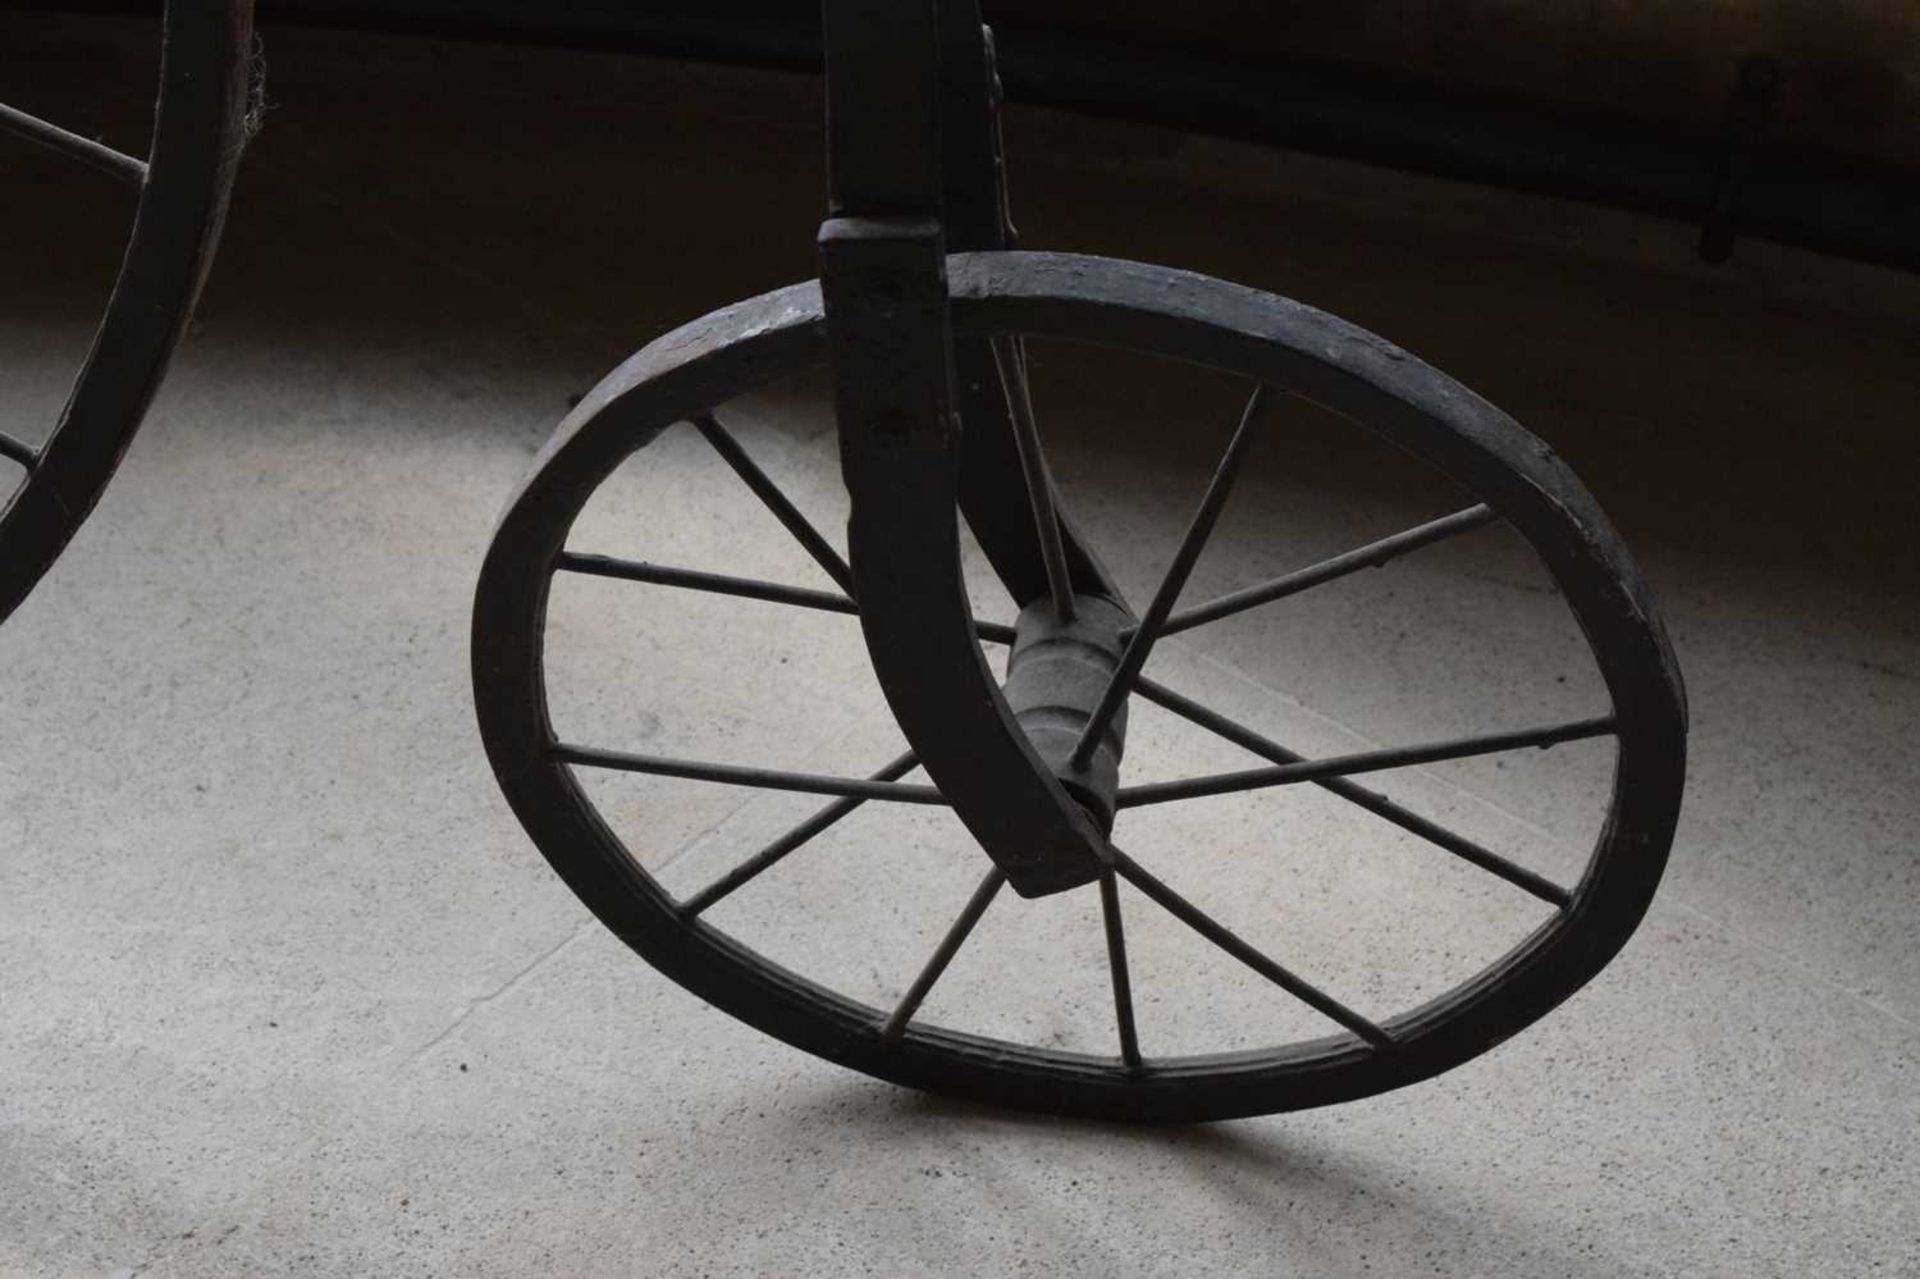 Replica penny farthing - Image 7 of 13